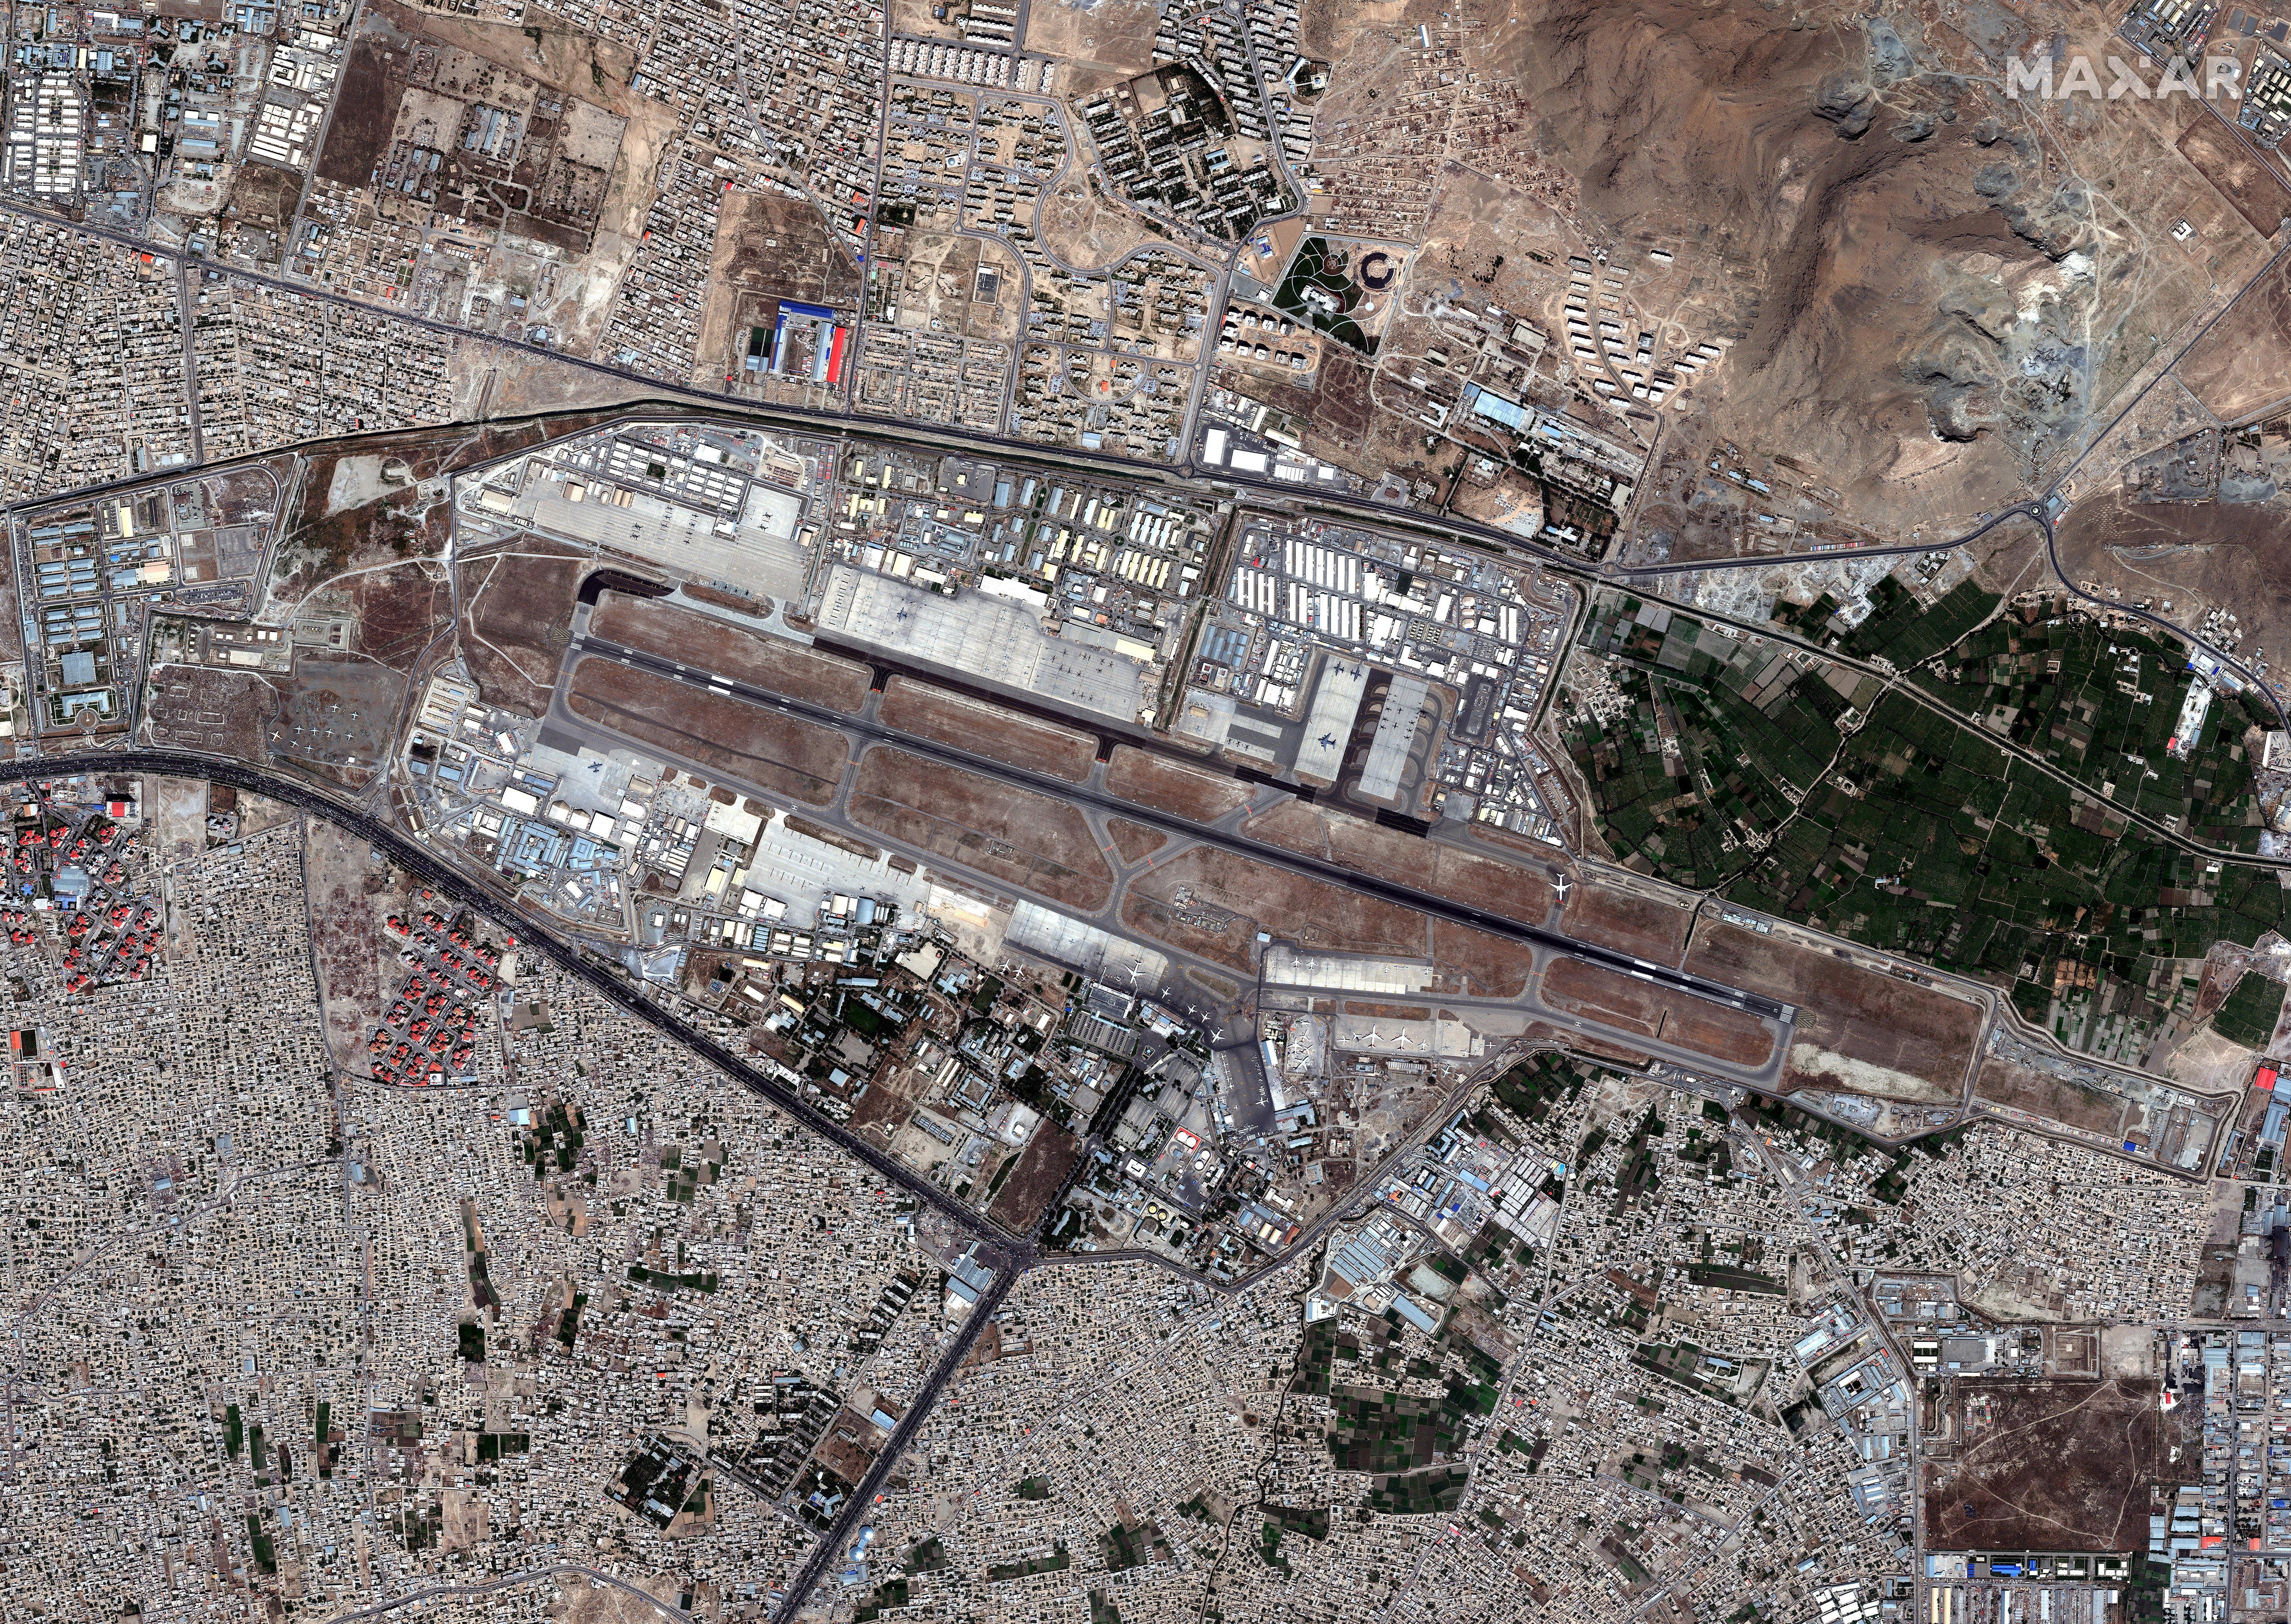 An overview of Kabul's airport in Afghanistan